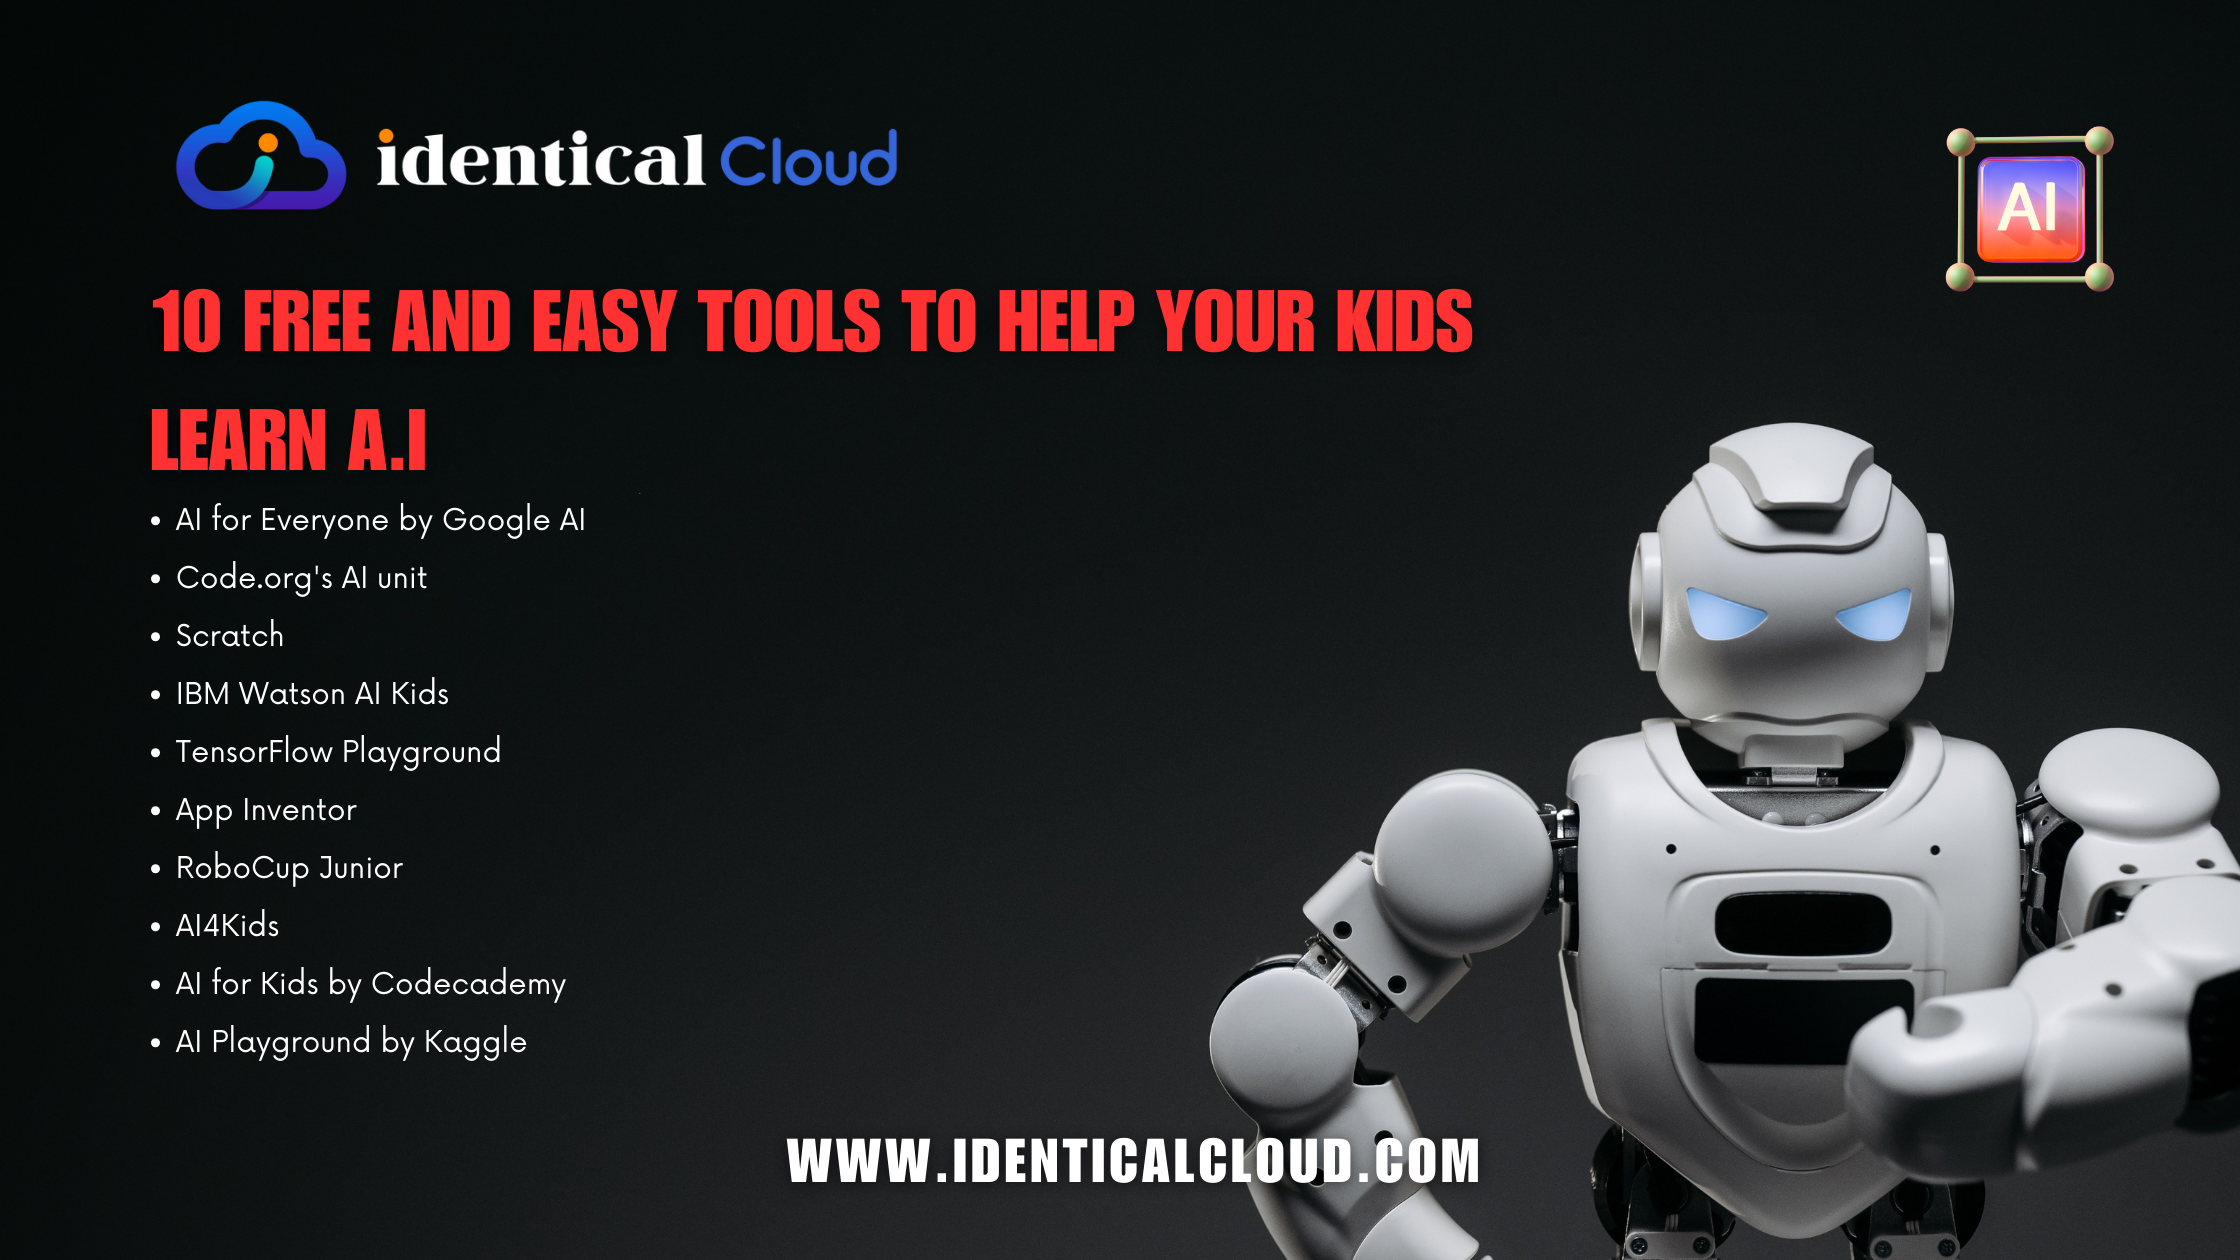 10 Free and Easy Tools to Help Your Kids Learn A.I - identicalcloud.com